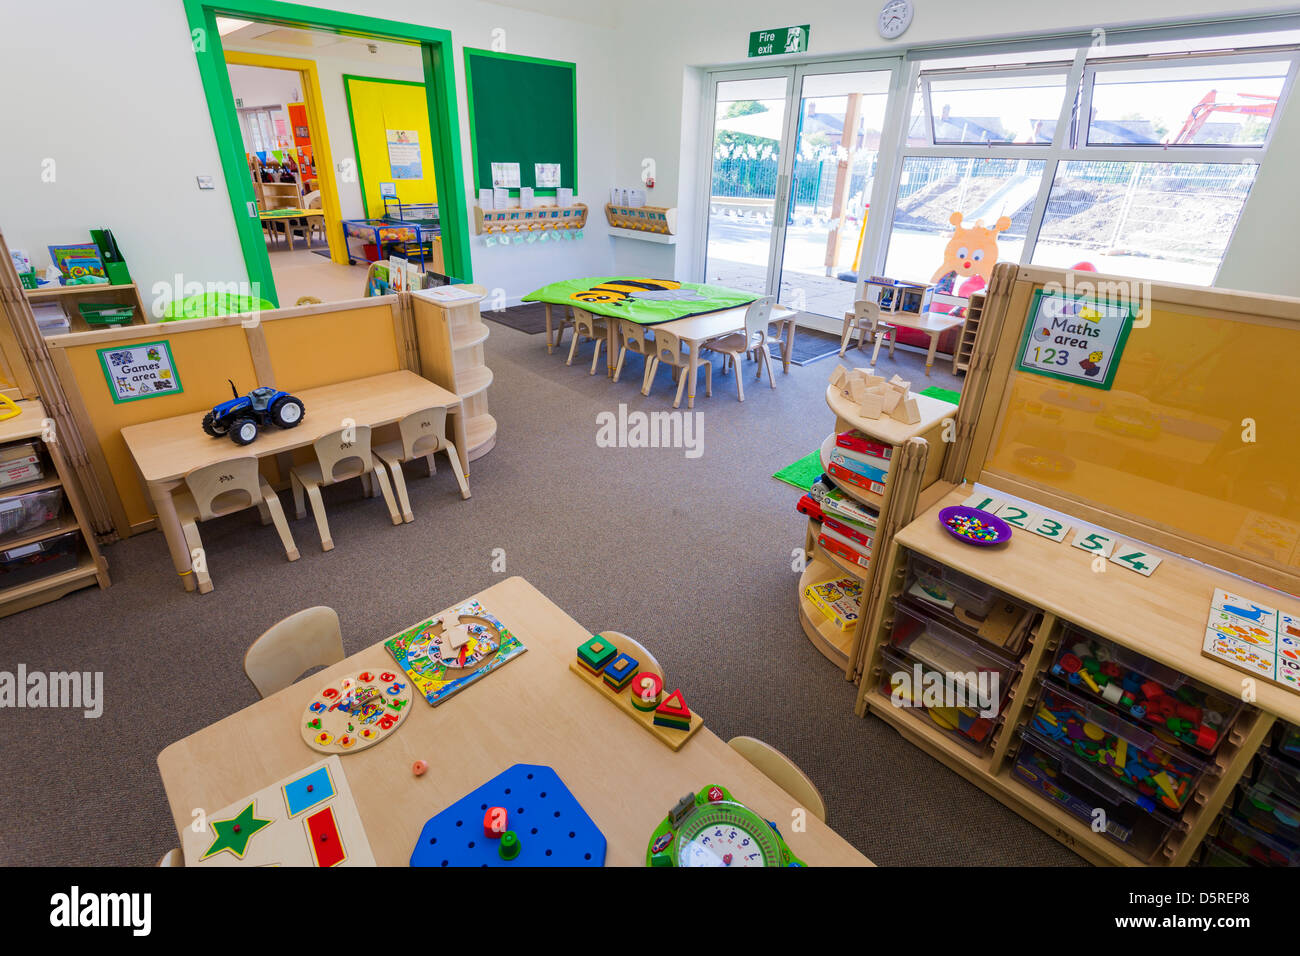 Whitley Park Nursery School  unoccupied infant classroom Stock Photo